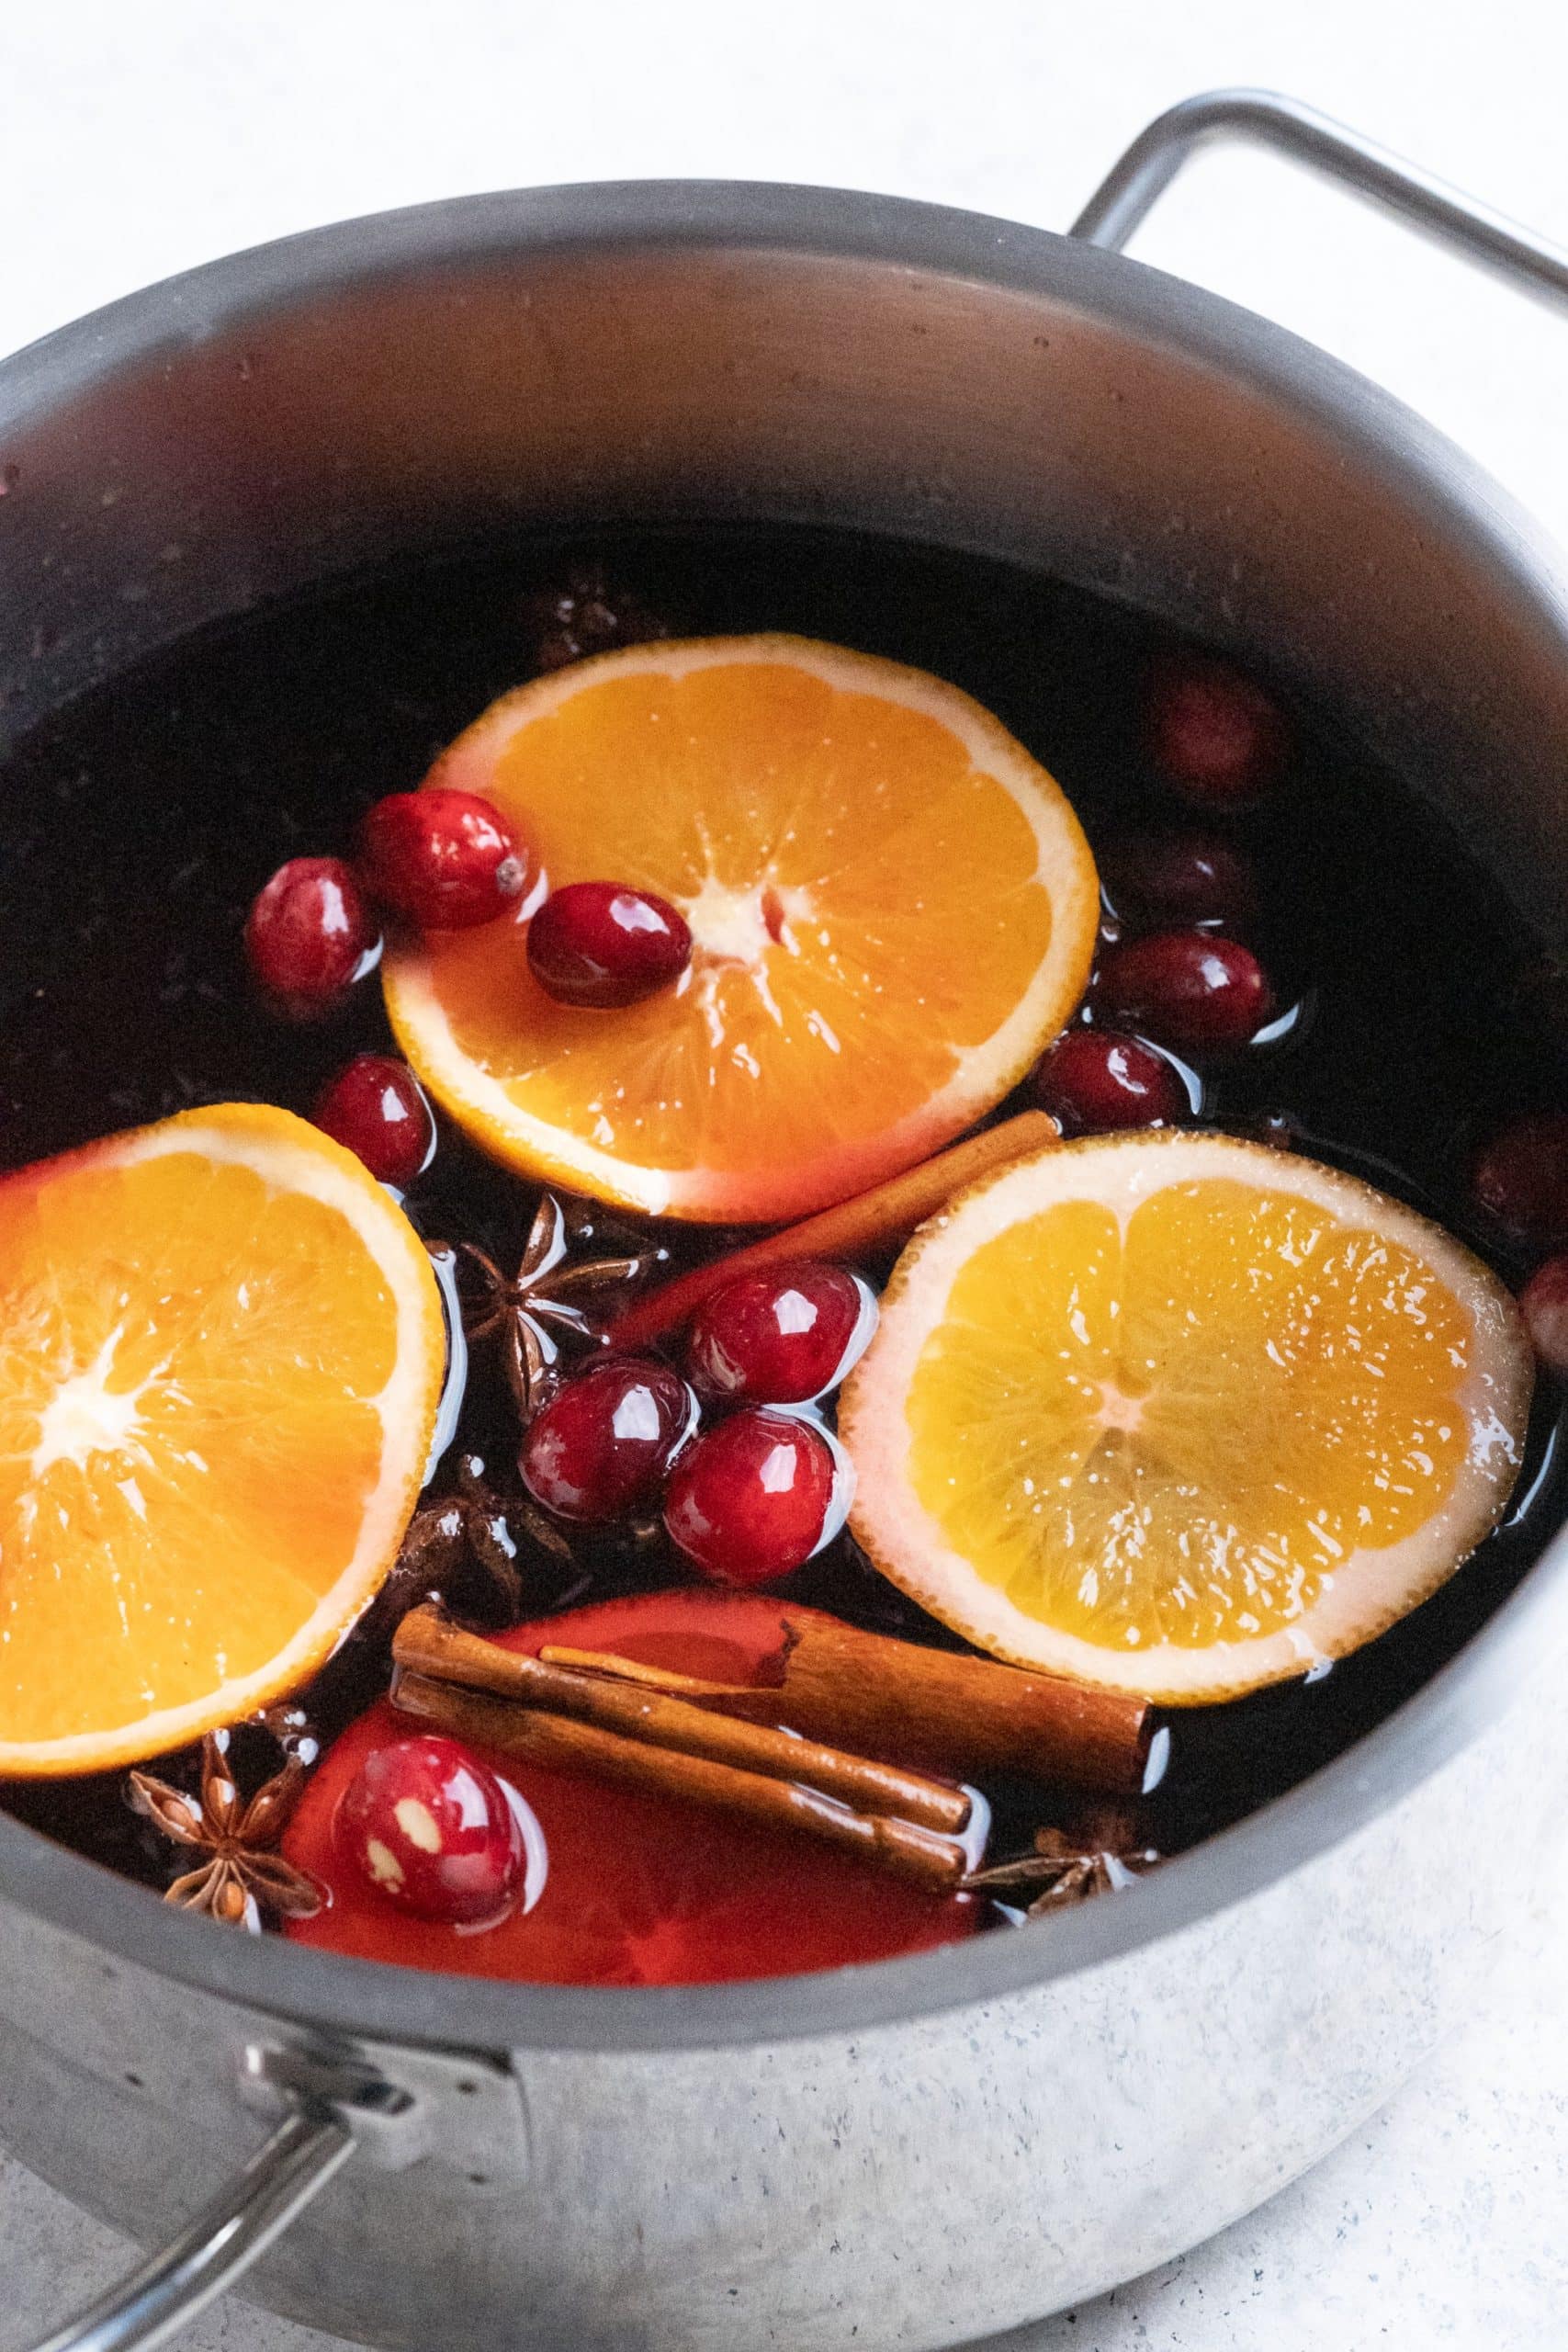 Vin chaud maison - Recette facile by Neary